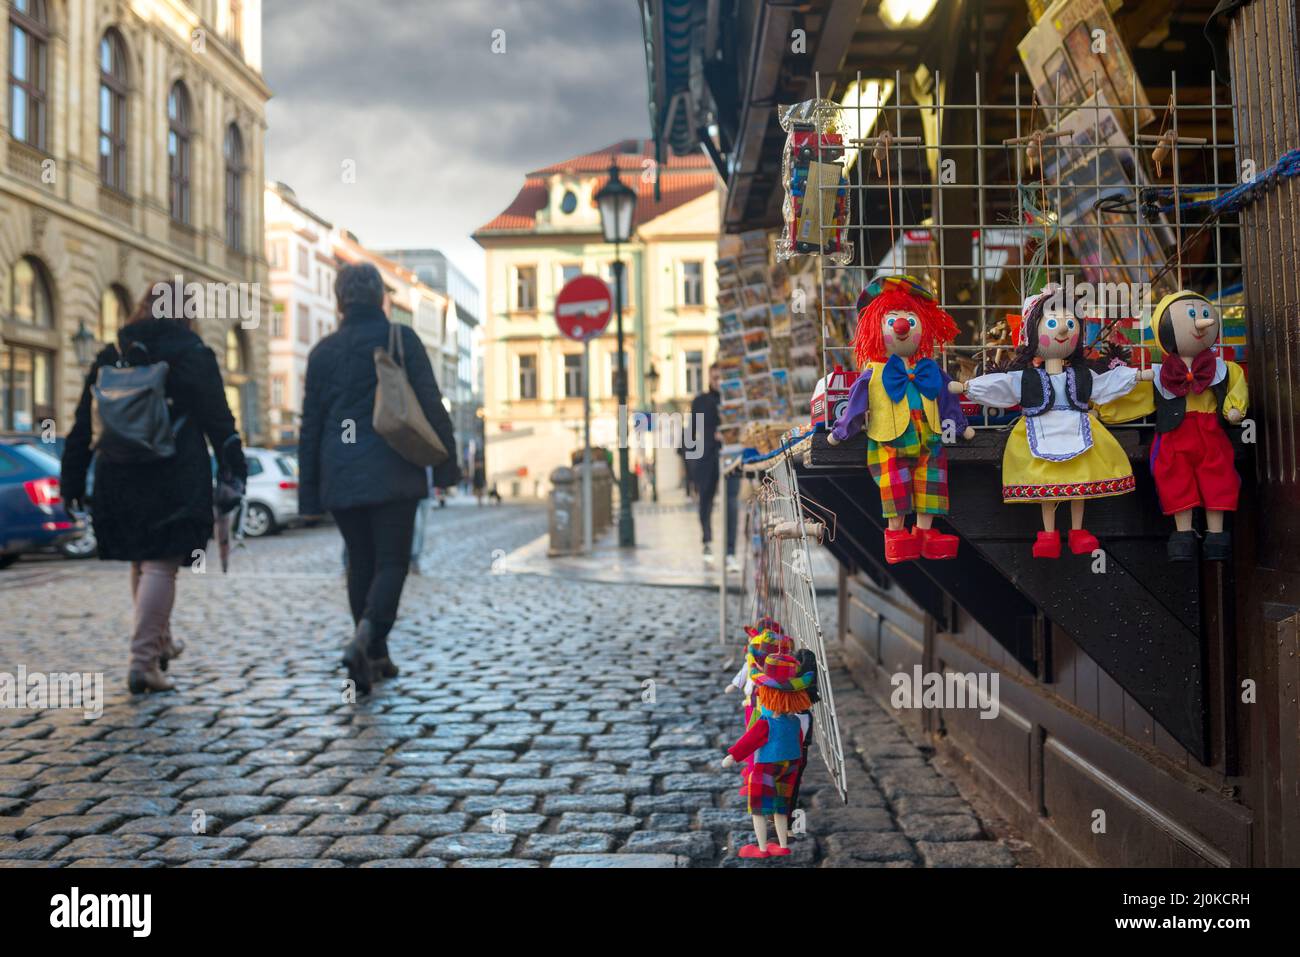 Tourists passing a dolls in a shop in old city of Prague Stock Photo